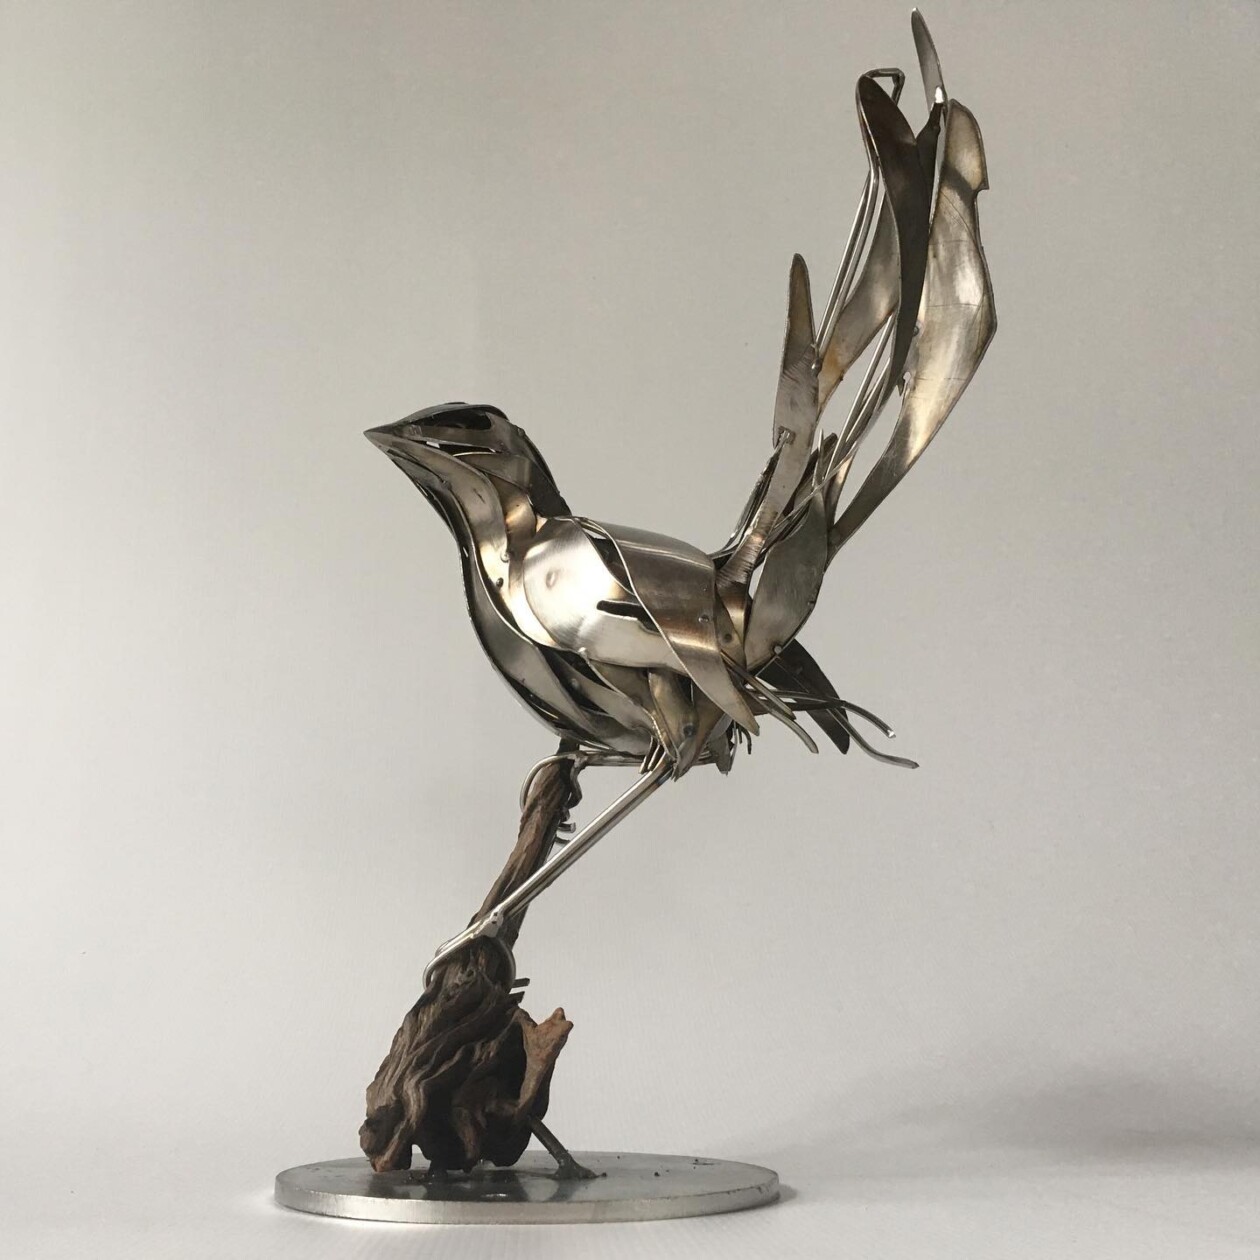 Magnificent Metallic Animal Sculptures Made With Sweeping Lines By Georgie Seccull (1)